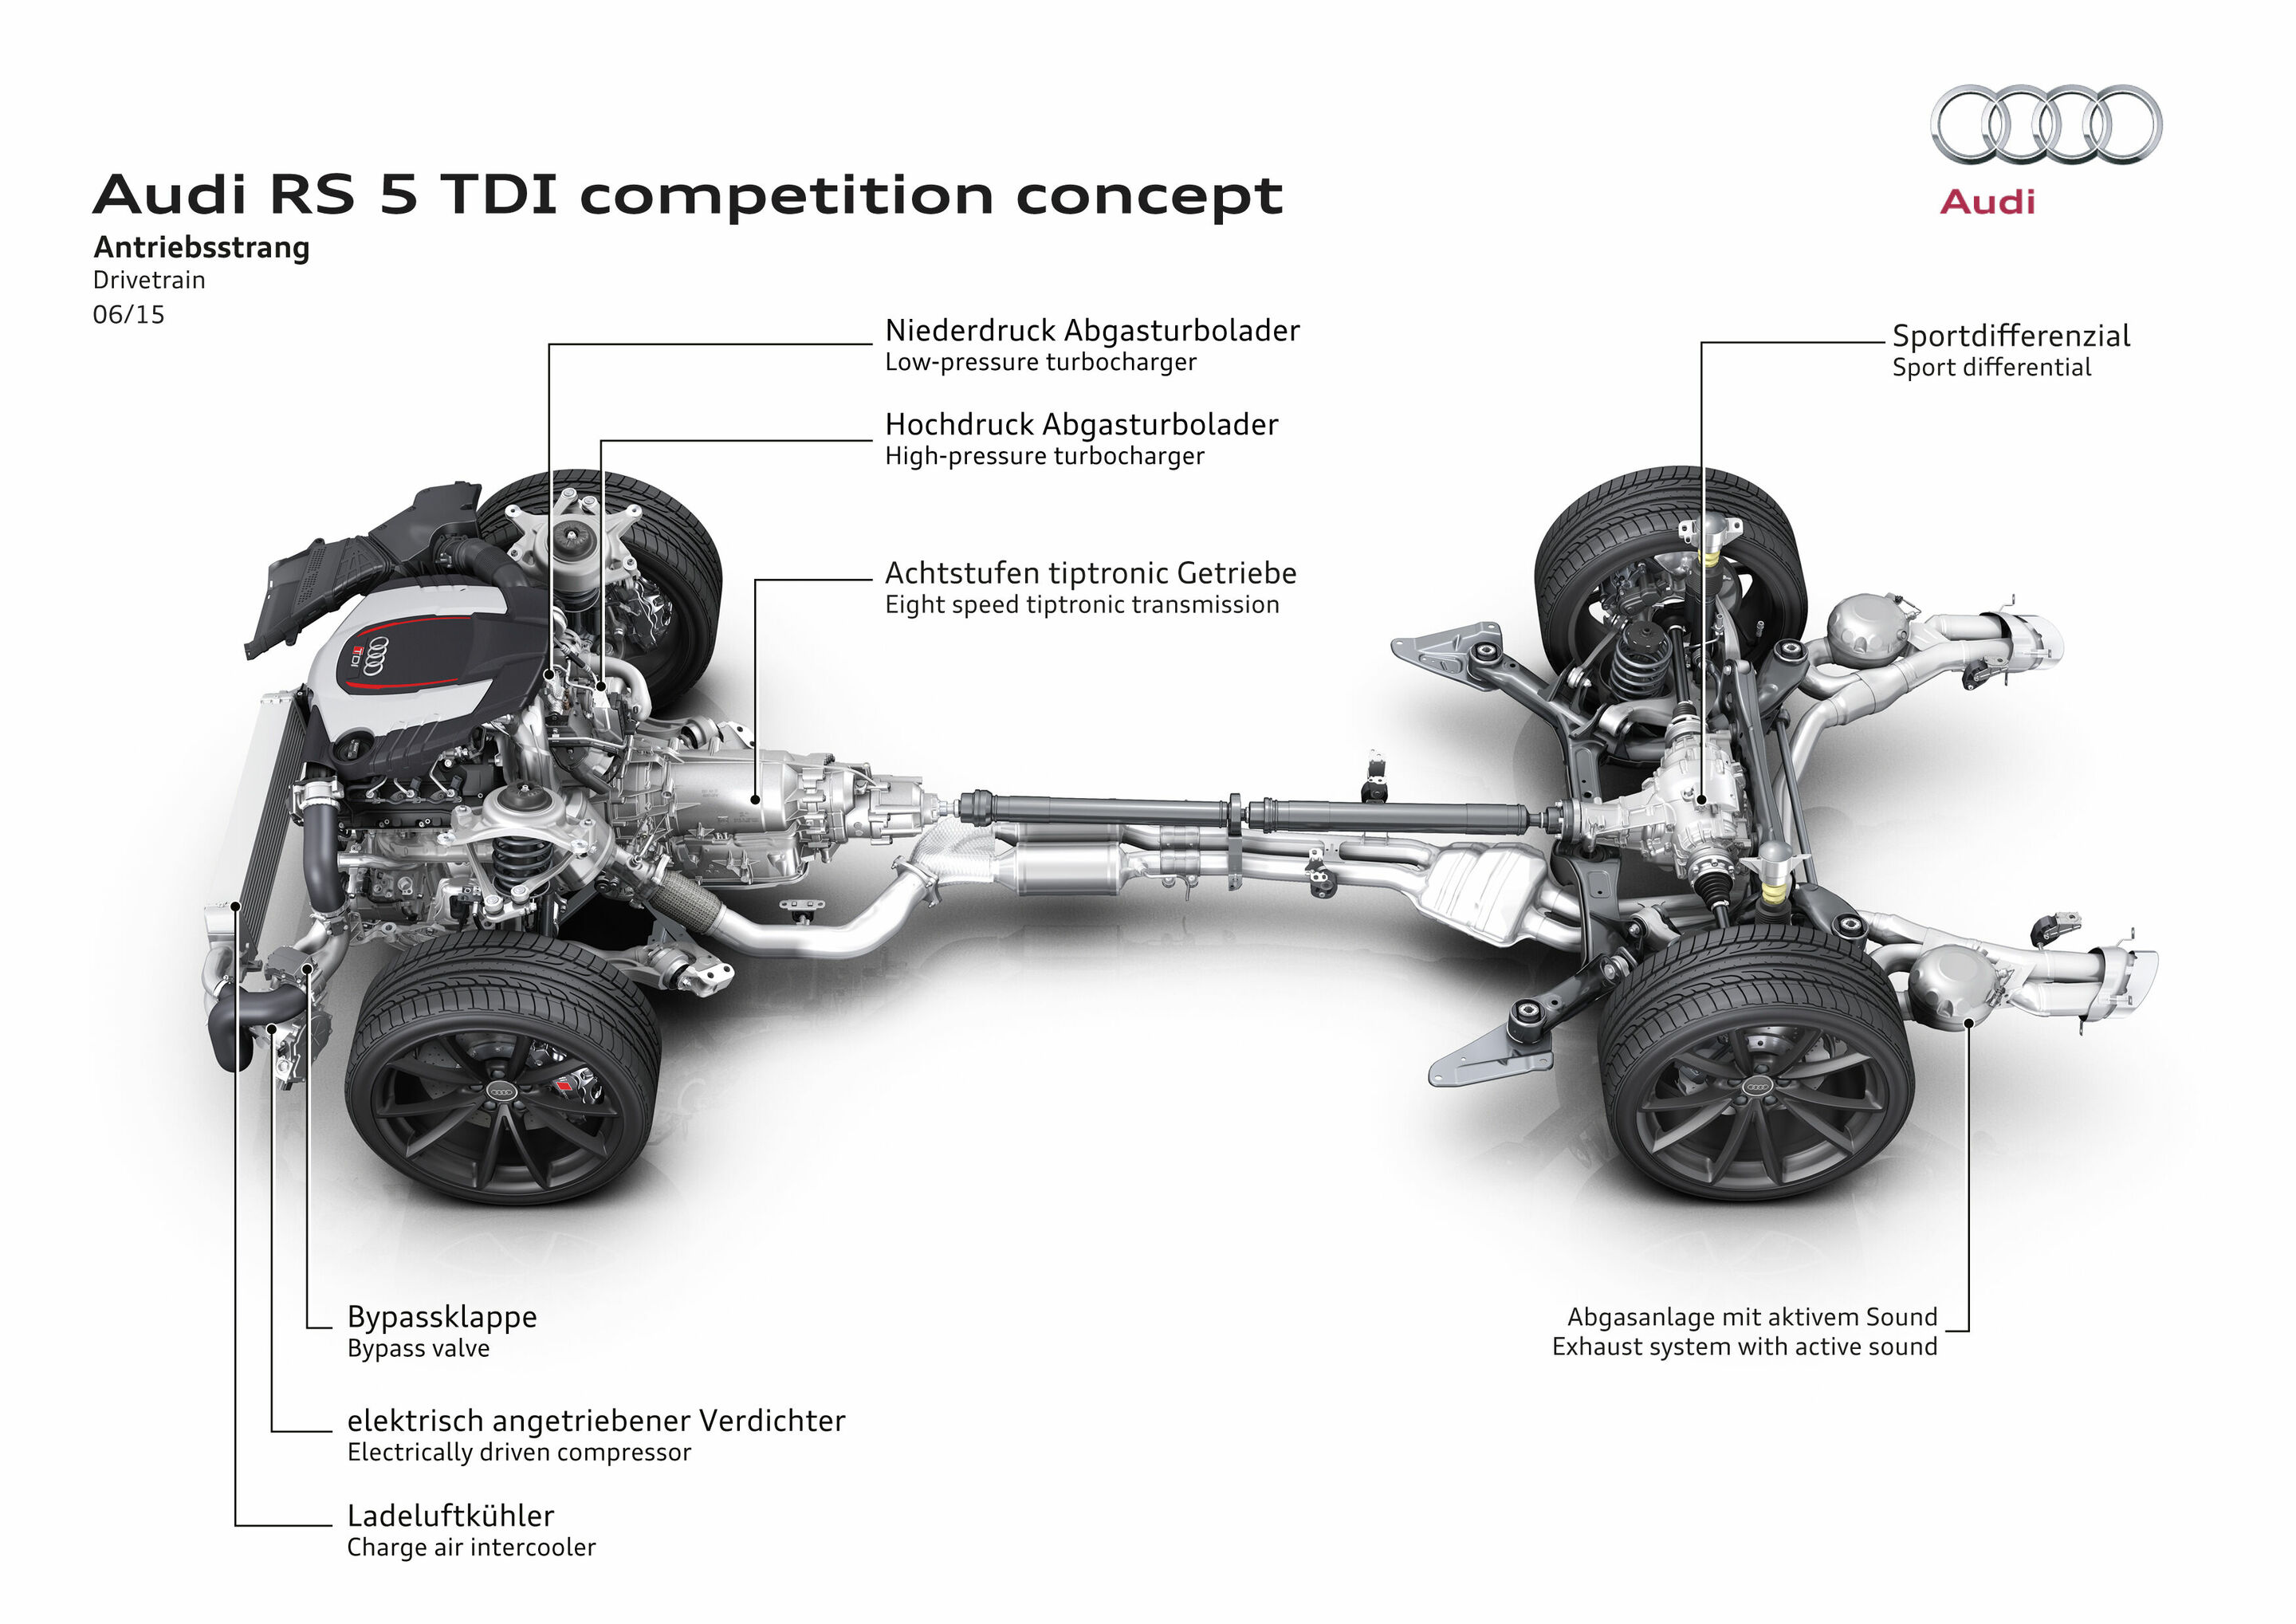 Audi RS 5 TDI competition concept